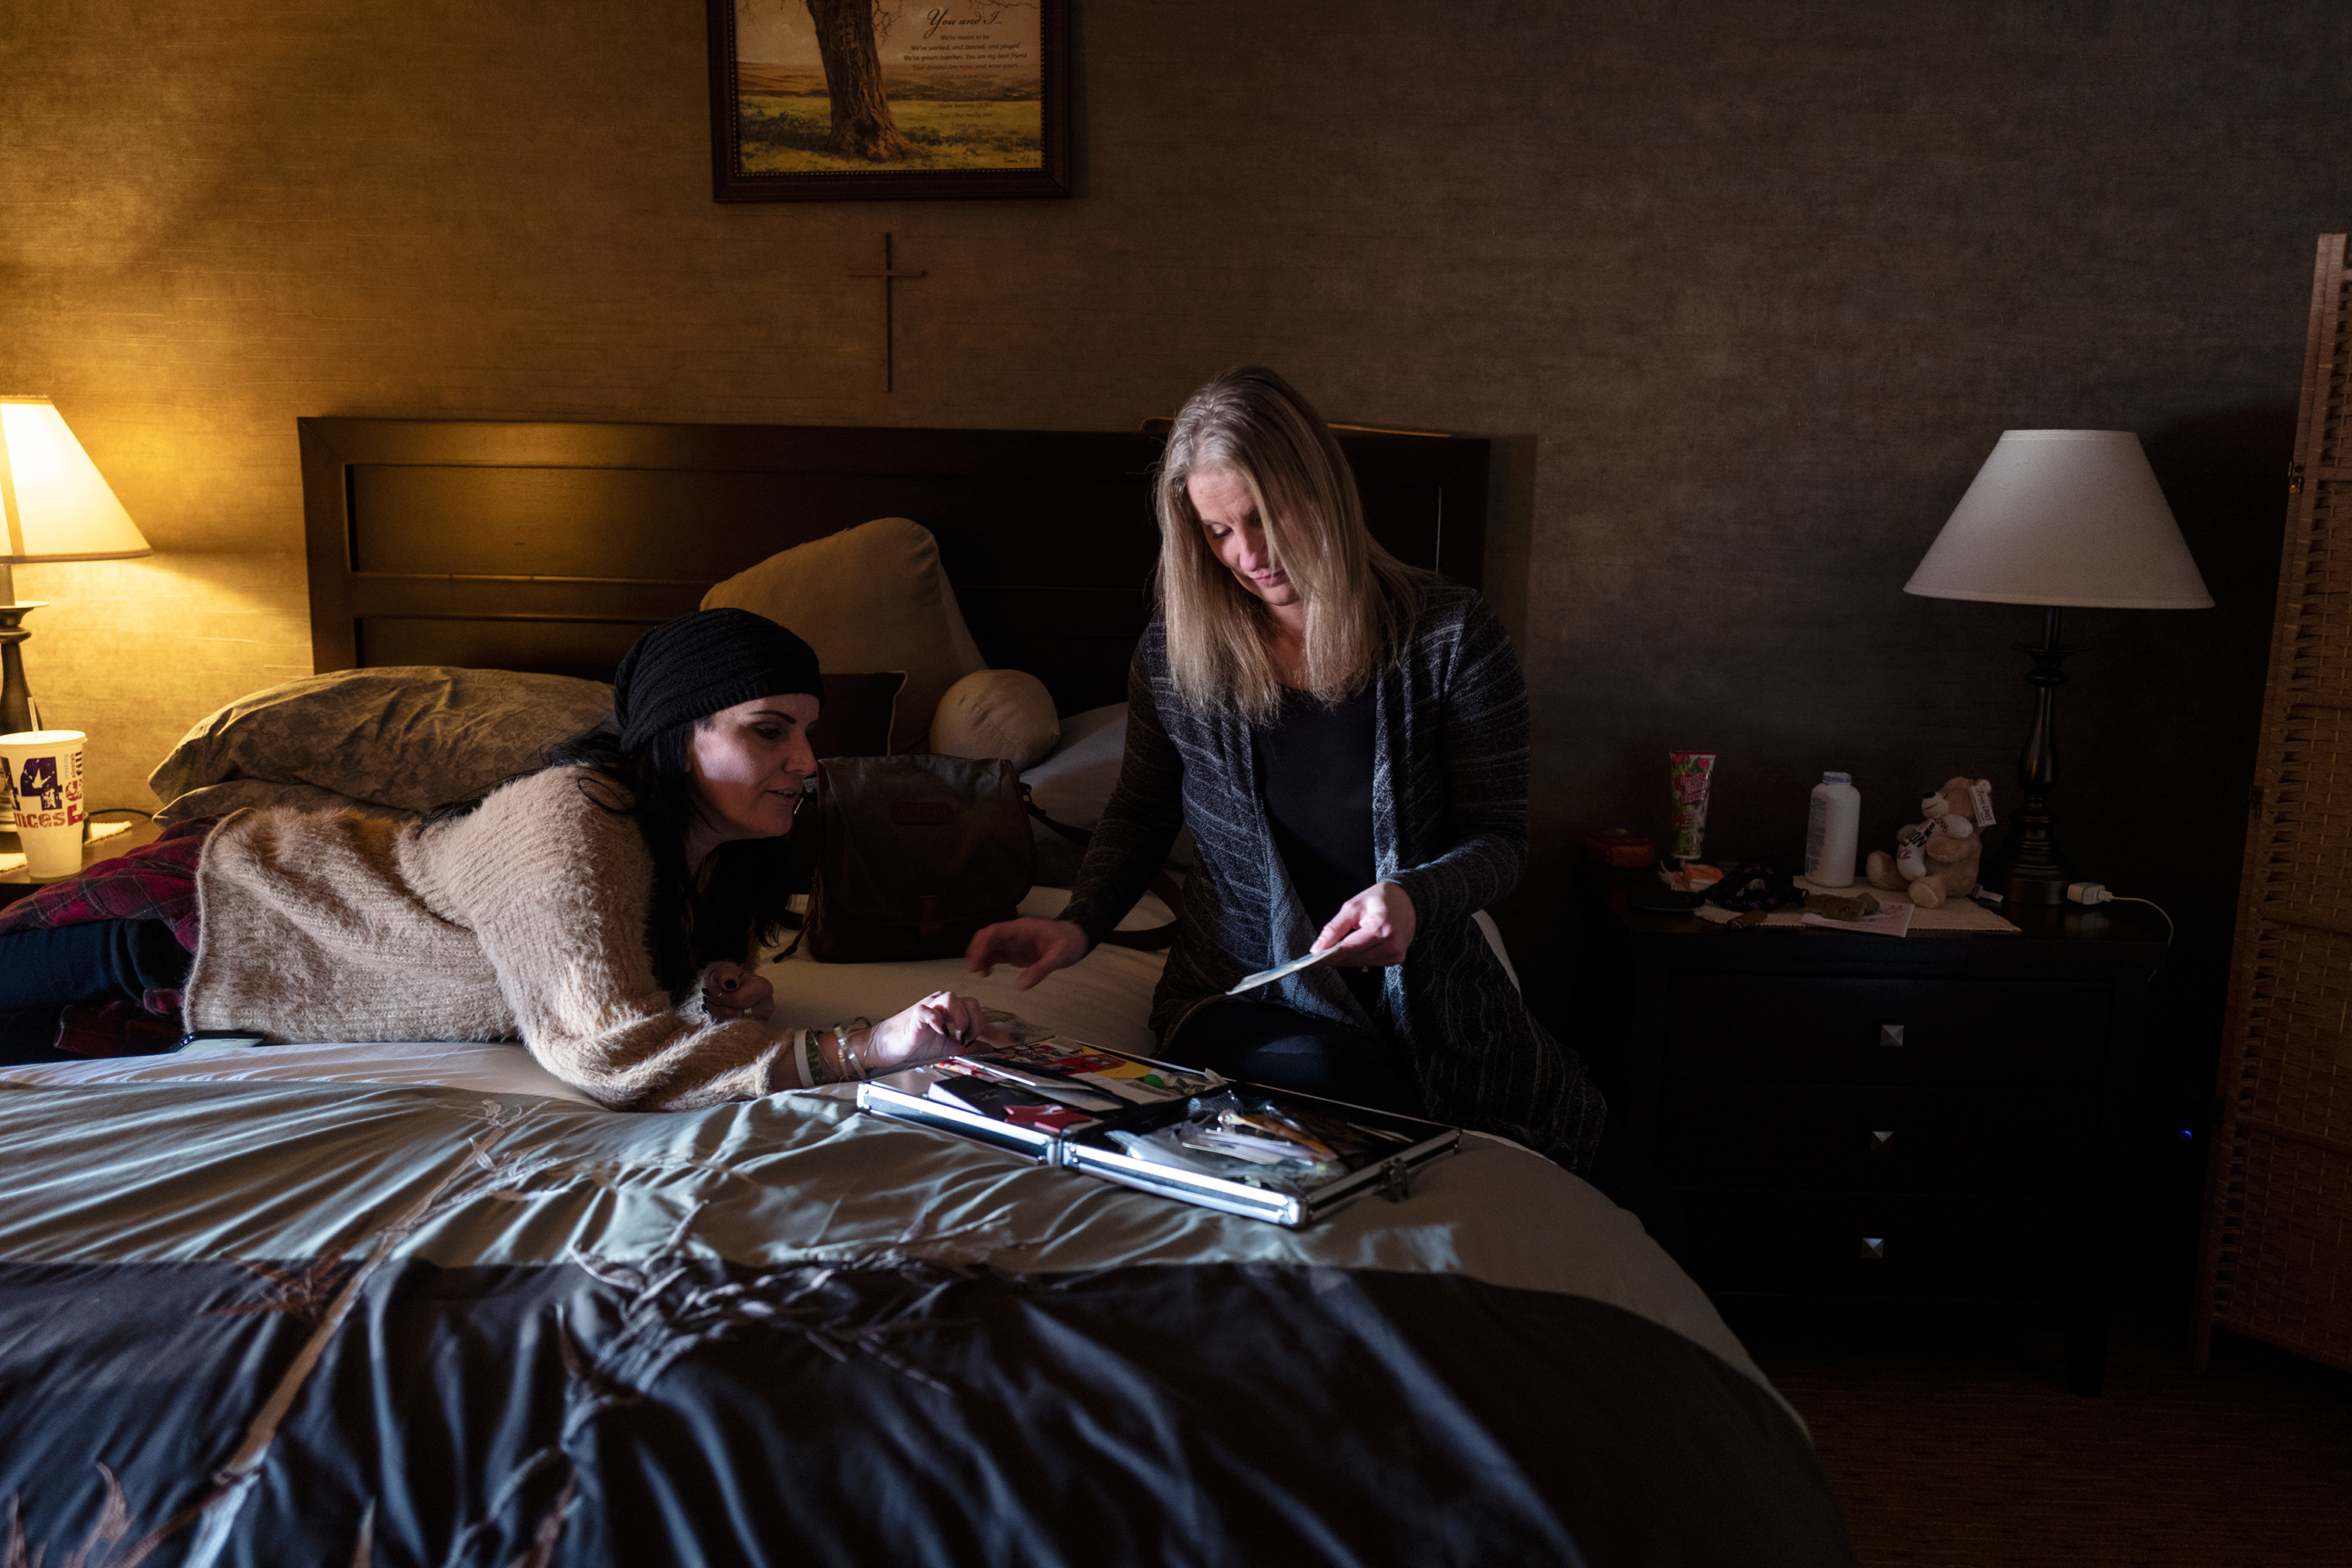 Sex-trafficking survivor Danielle Knoblauch shows Lazenko the contents of her Hope Chest at her home in North Dakota, April 25, 2018 (Lynsey Addario for TIME)